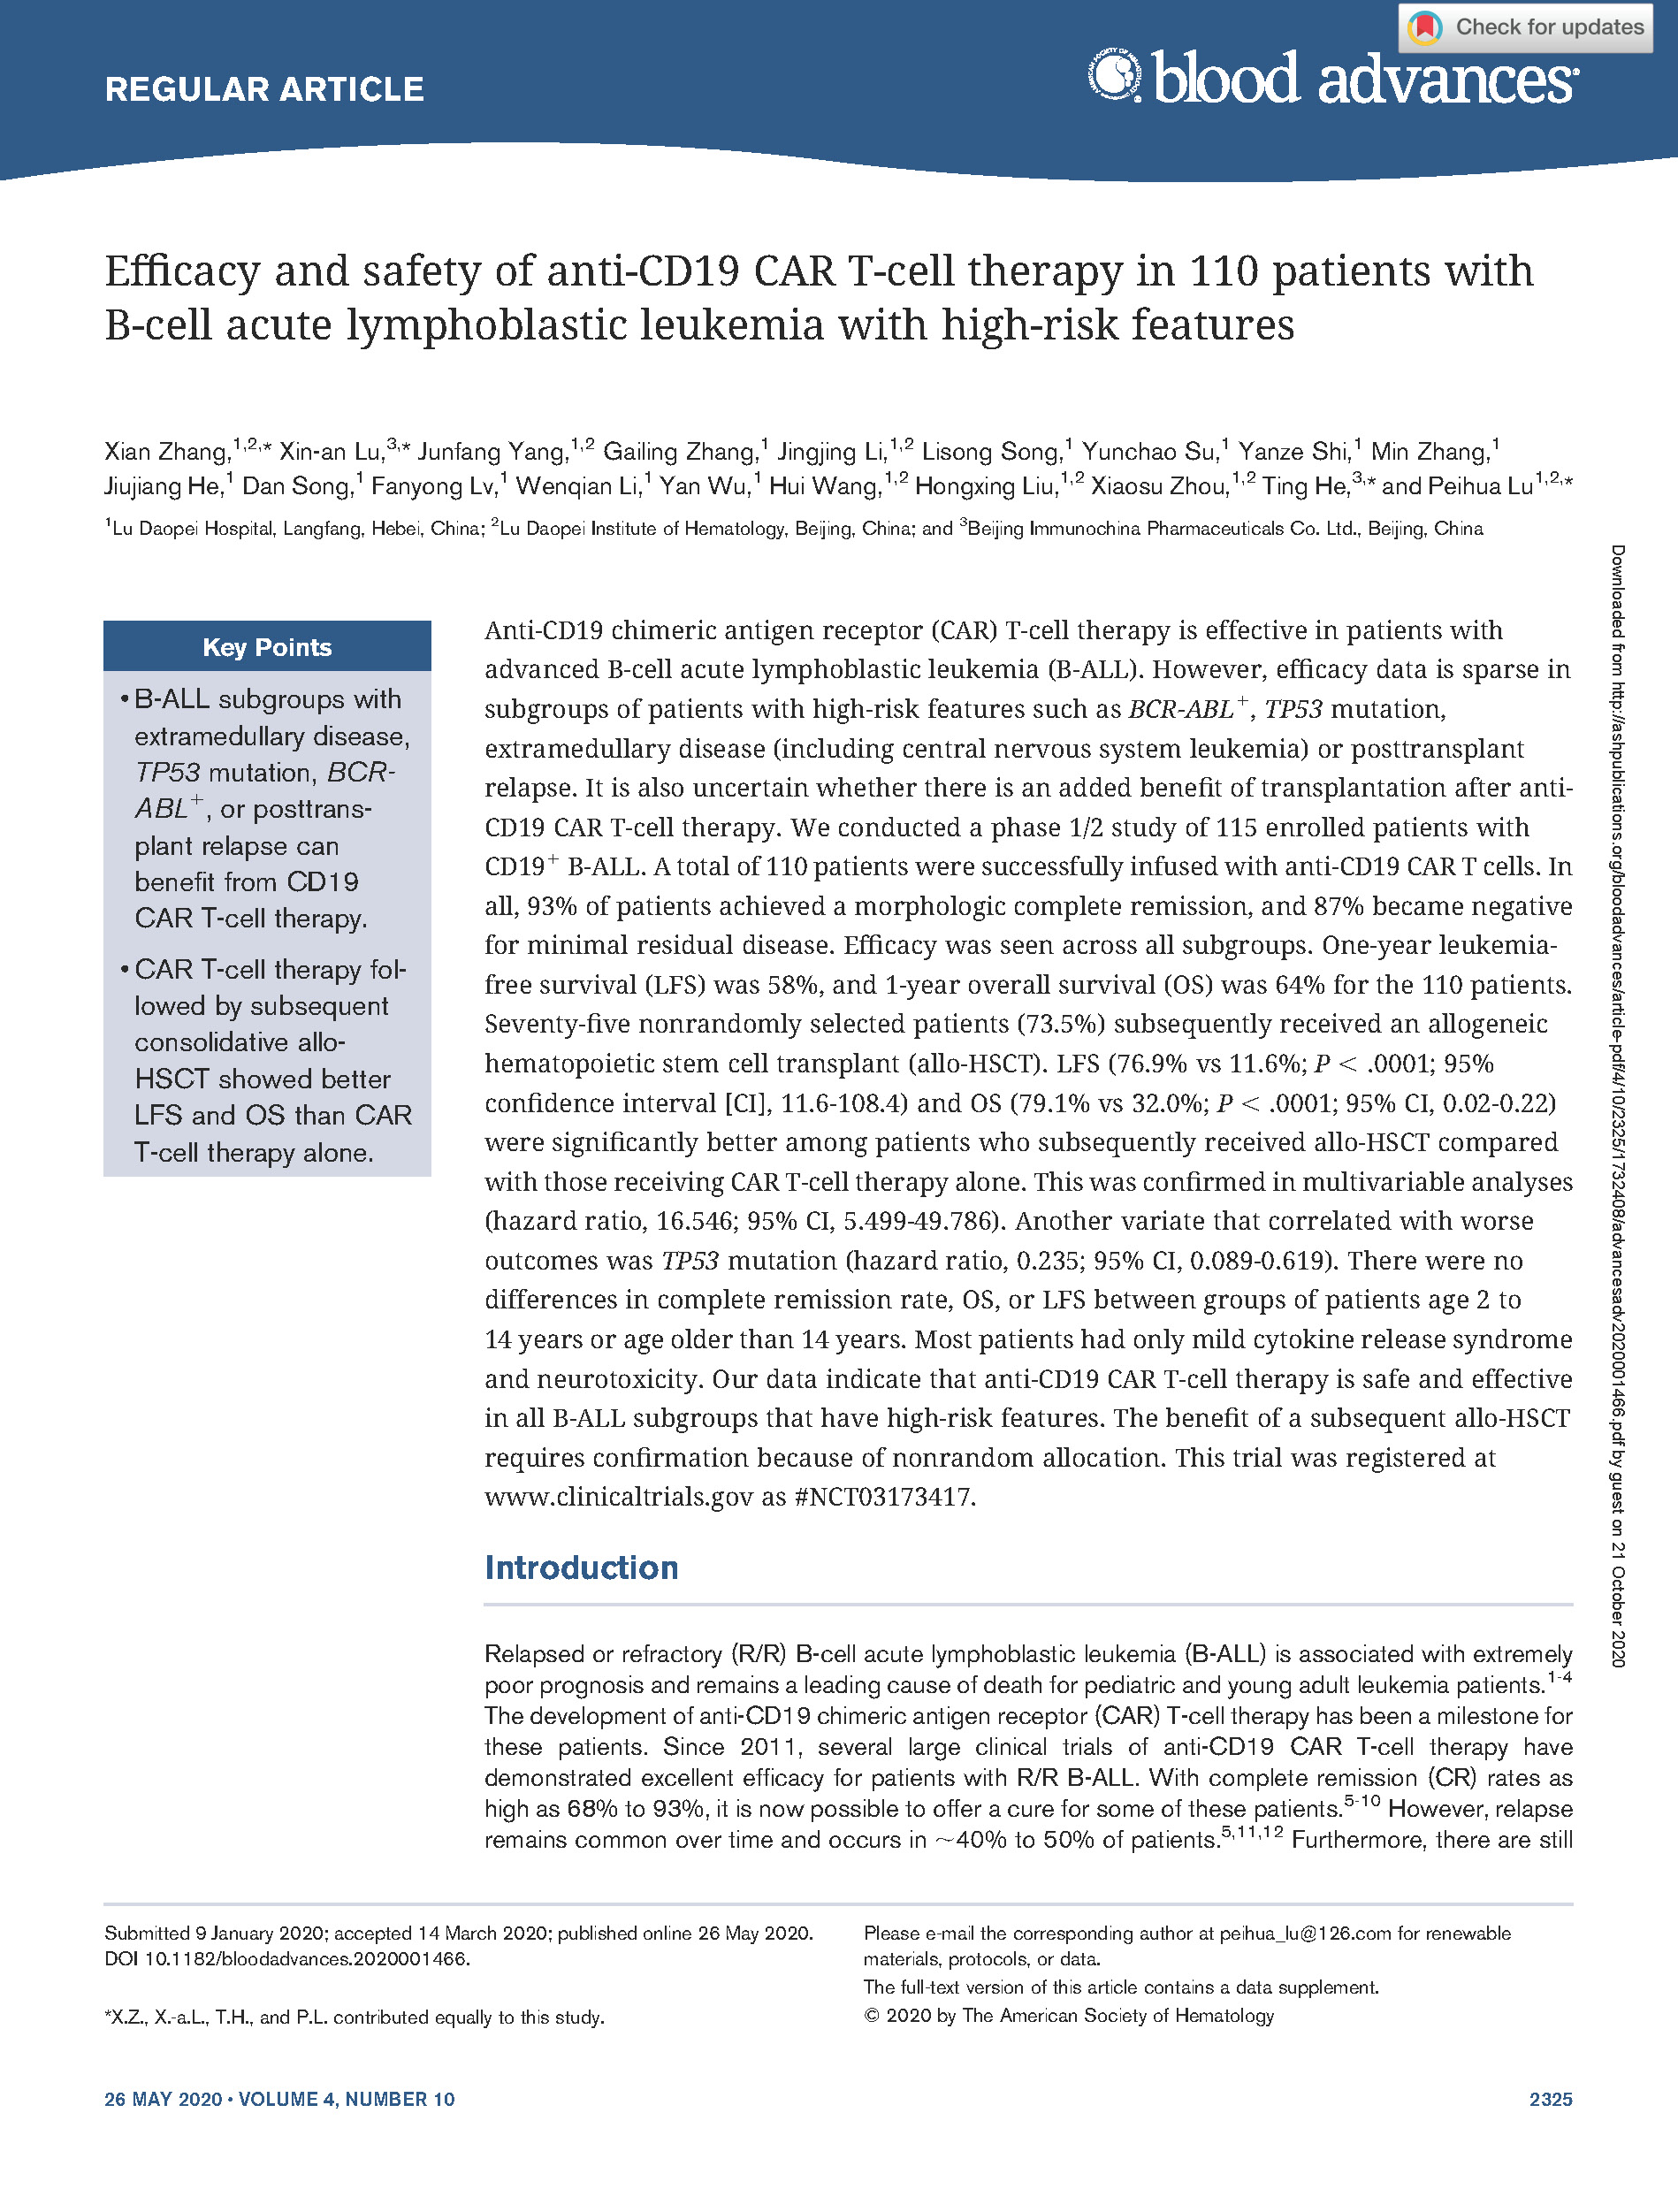 2020-Efficacy and safety of anti-CD19 CAR T-cell therapy in 110 patients with B-cell acute lymphoblastic leukemia with high-risk features.jpg